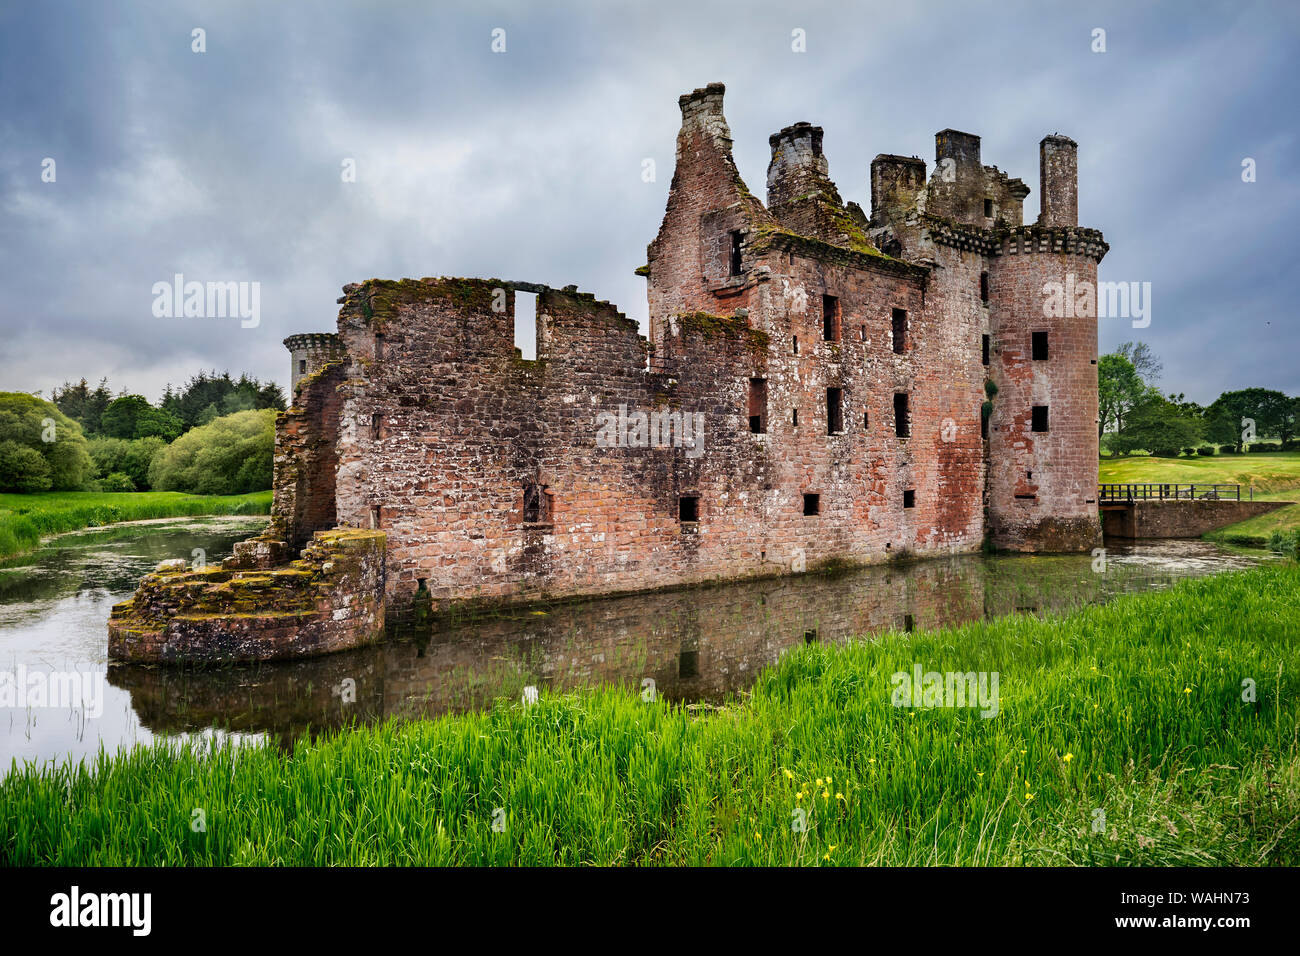 Caerlaverock Castle, side view of the moated triangular fortified castle built in the 13th century in southern Scotland, and abandoned in the 17th cen Stock Photo